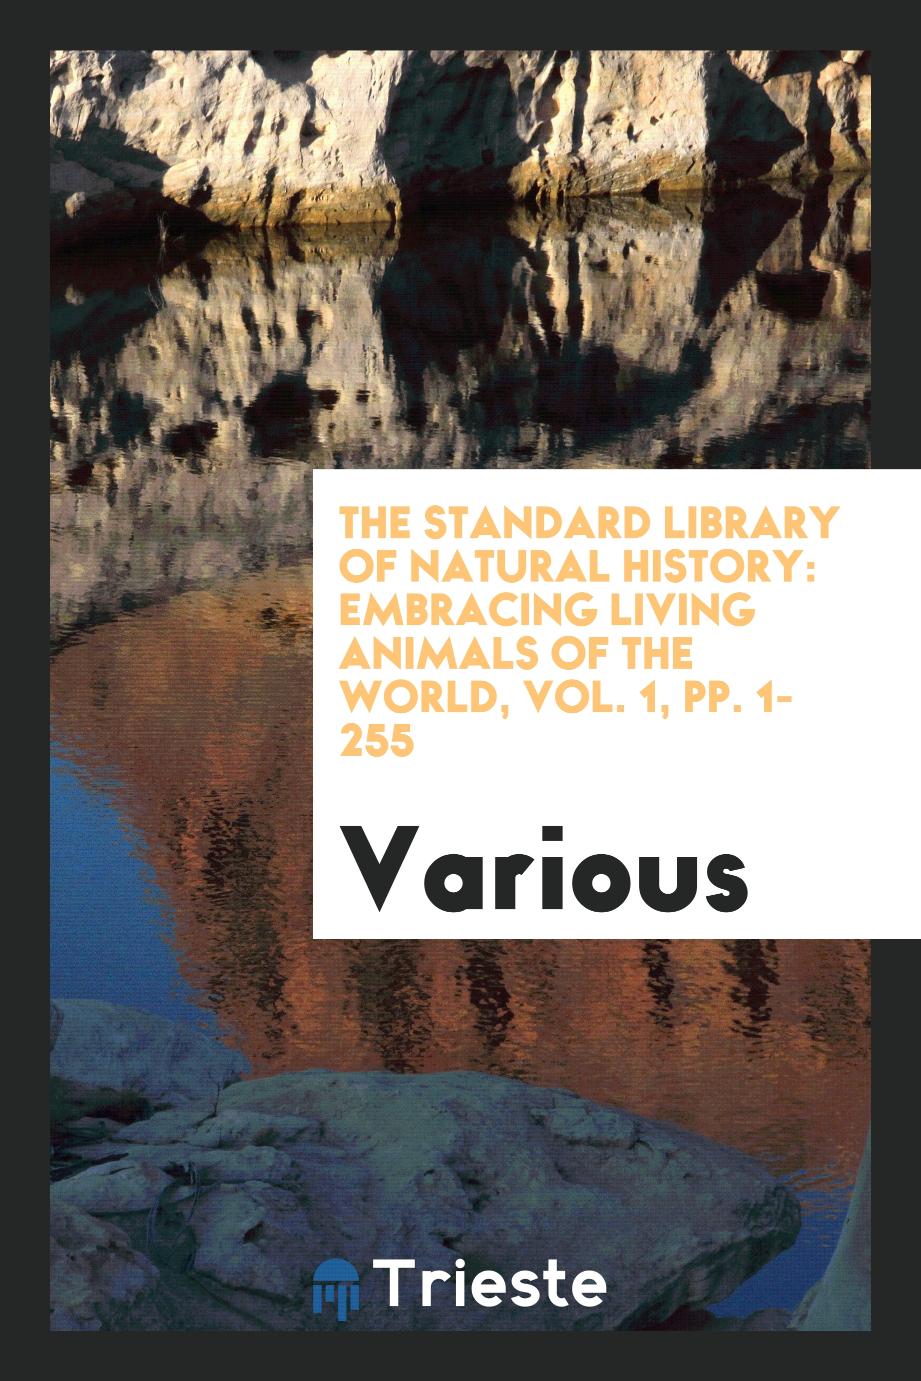 The Standard Library of Natural History: Embracing Living Animals of the World, Vol. 1, pp. 1-255